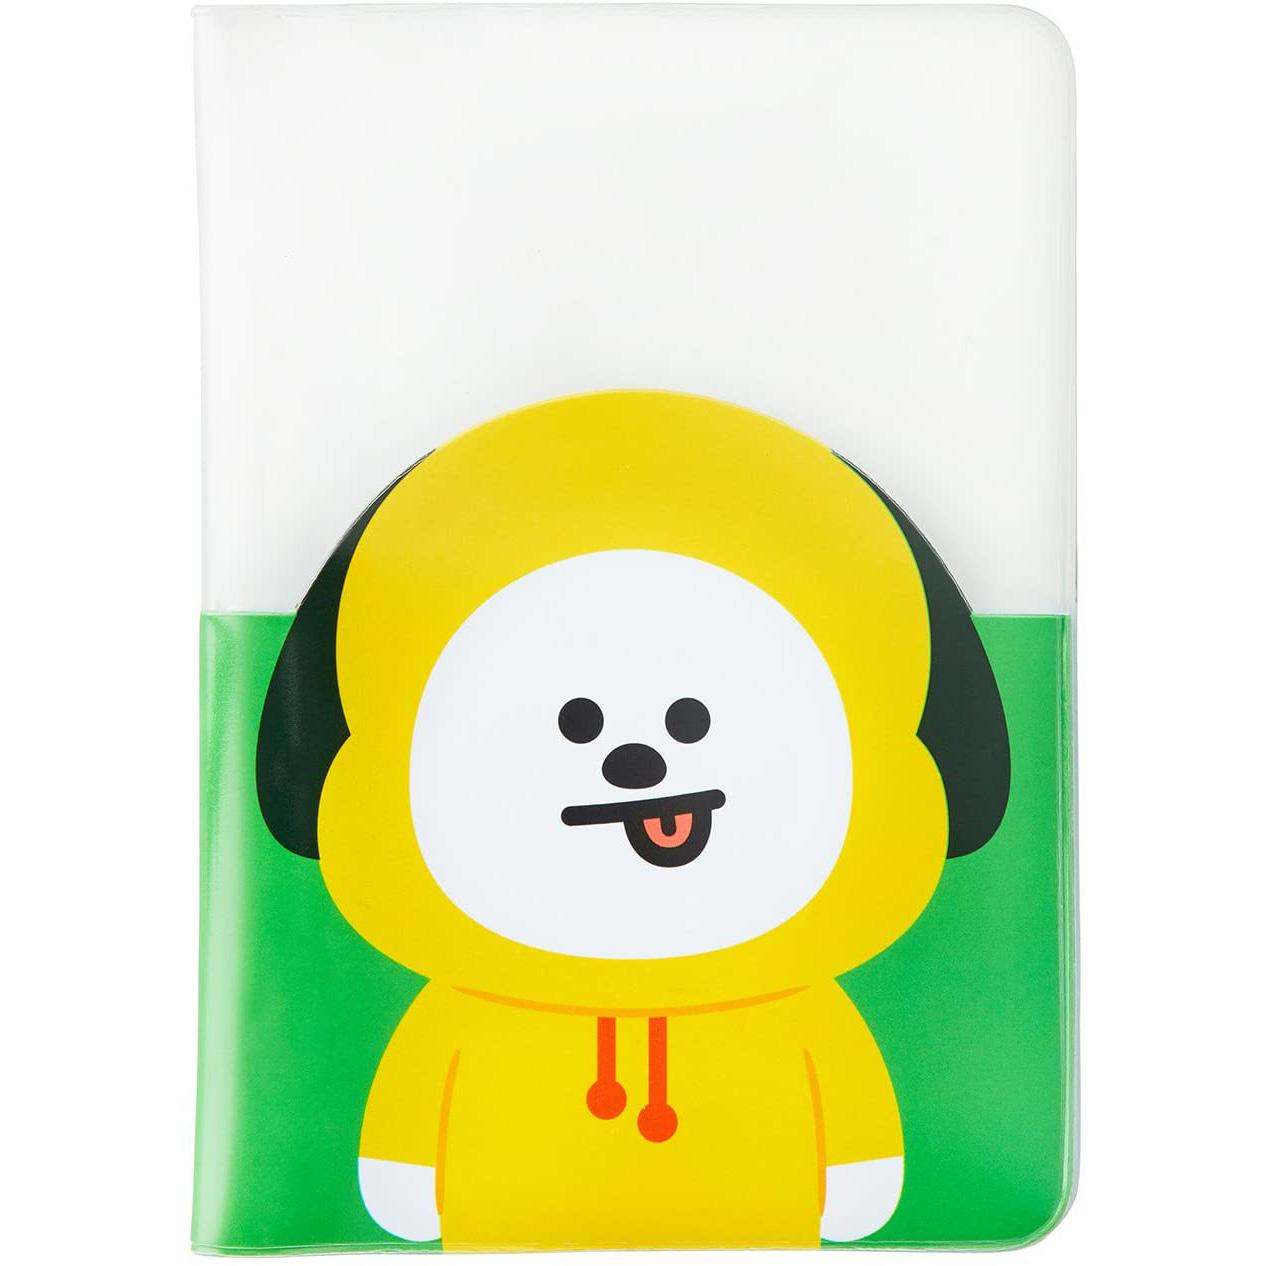 BT21 Cute Clear Passport Holder Cover Wallet for Travel for $5.47